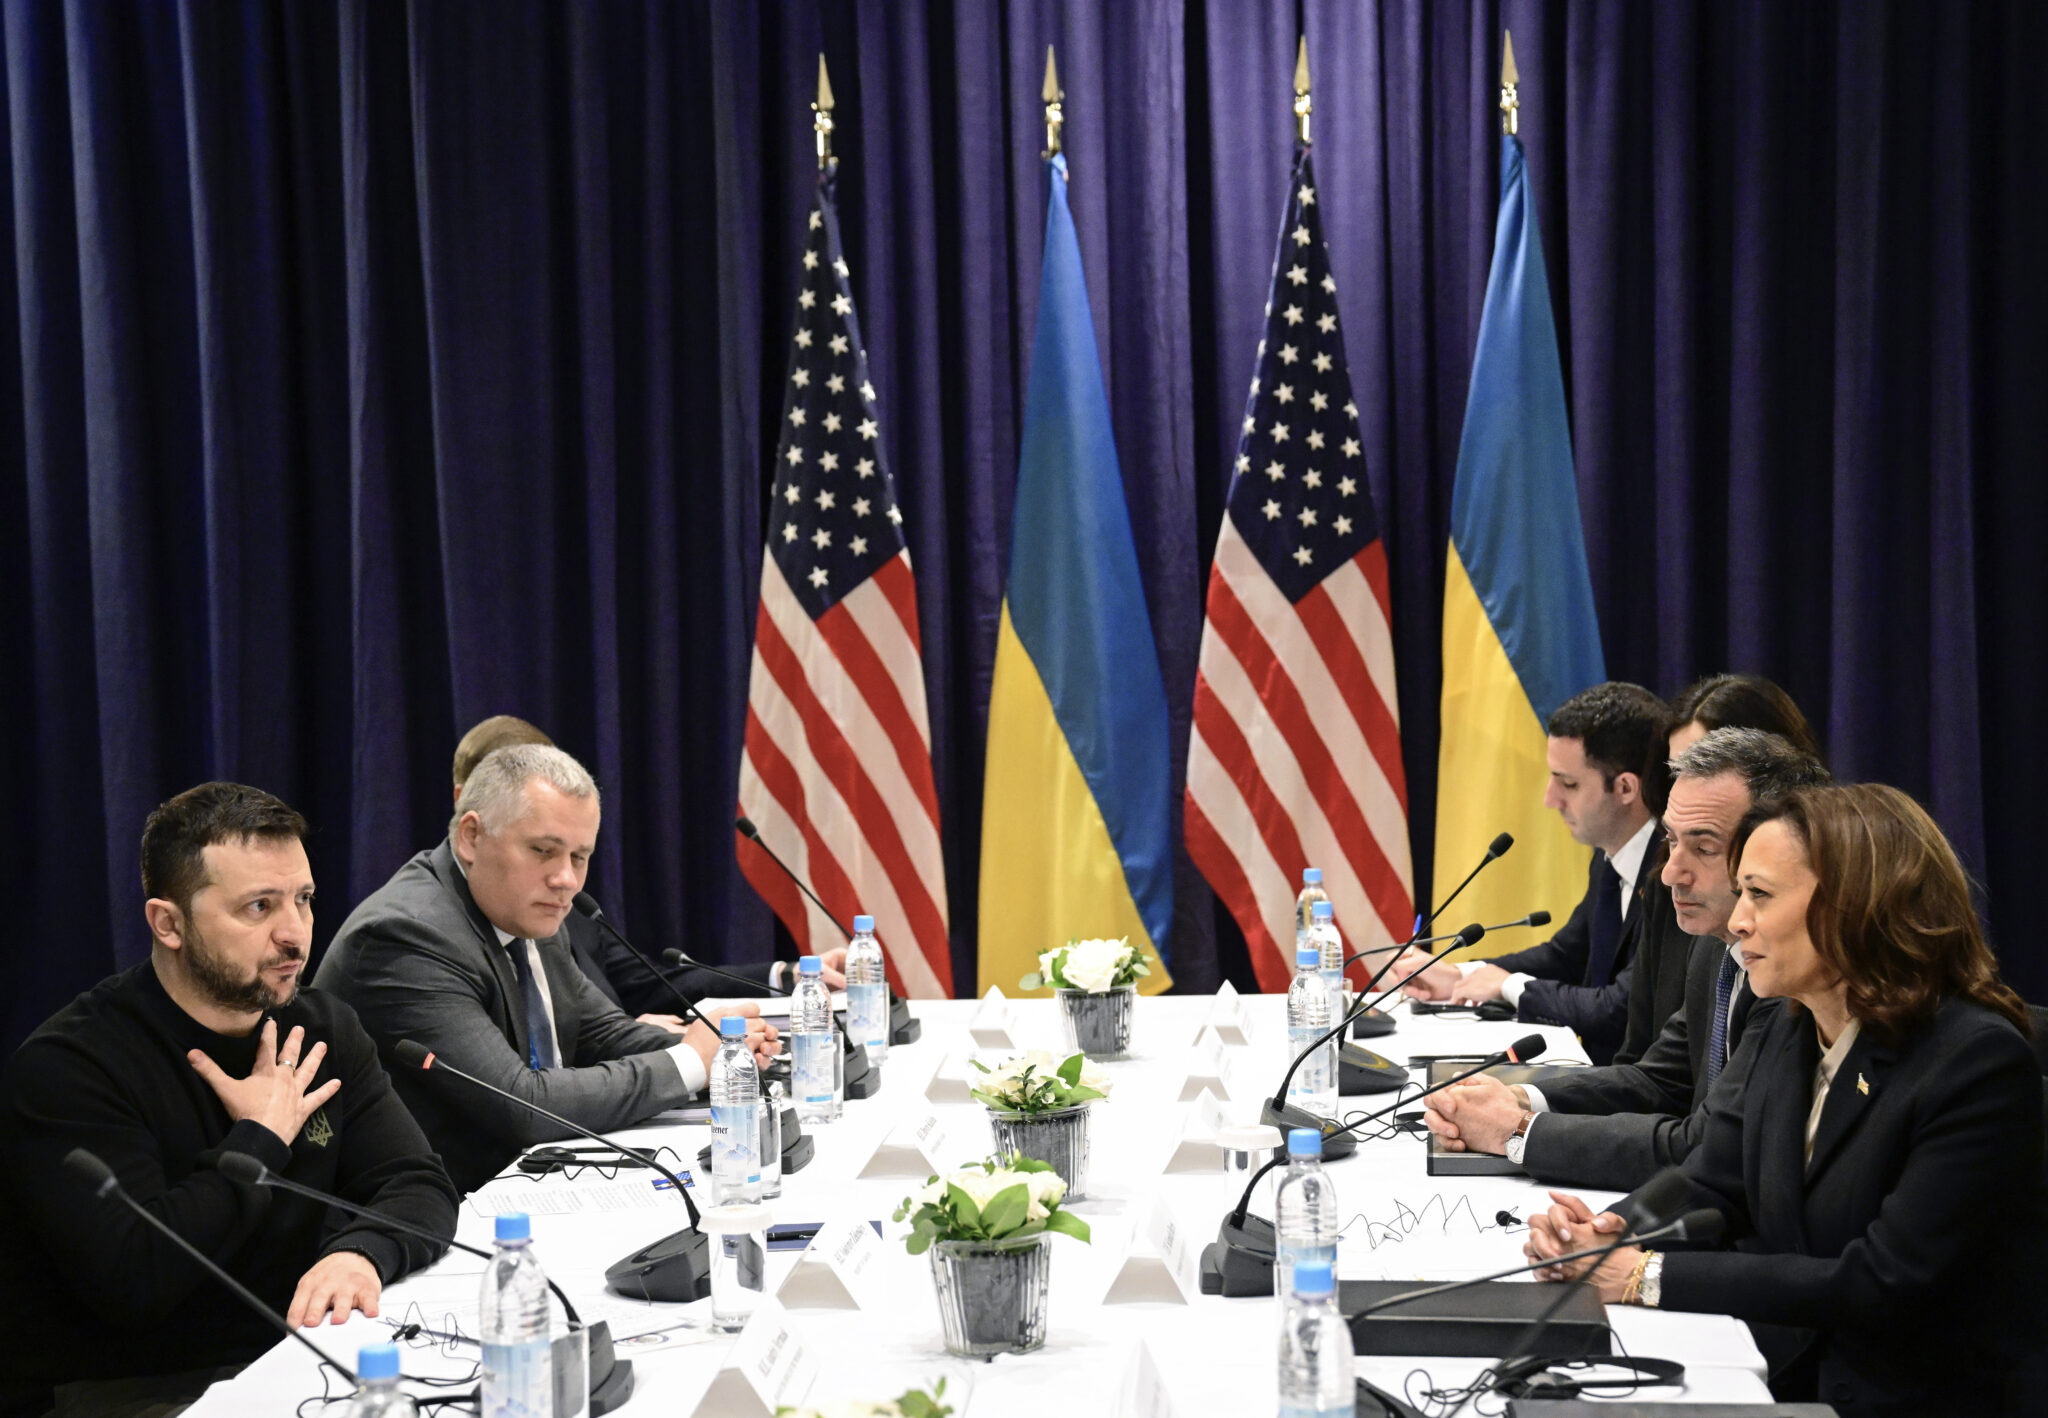 Ukraine’s Plea for U.S. Military Aid: A Critical Moment at Munich Security Conference